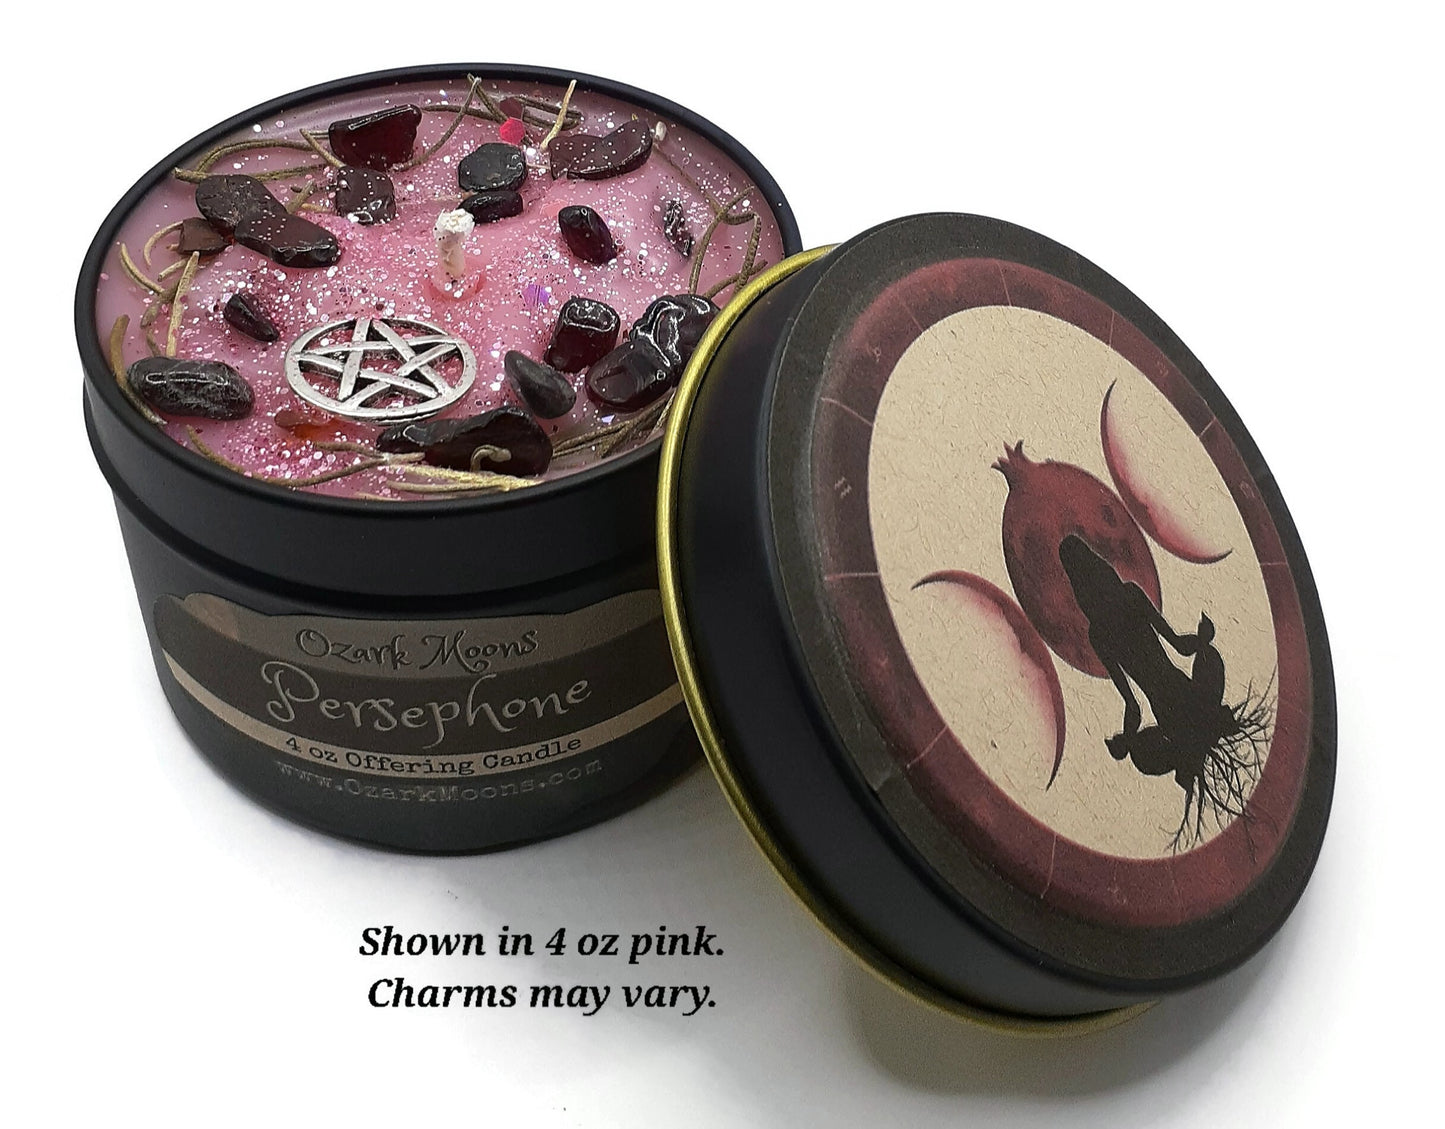 PERSEPHONE Greek Goddess of the Underworld and Agriculture Wax Melts or Candles With Red Garnet and Rosemary - Pagan Wiccan Offering Tarts